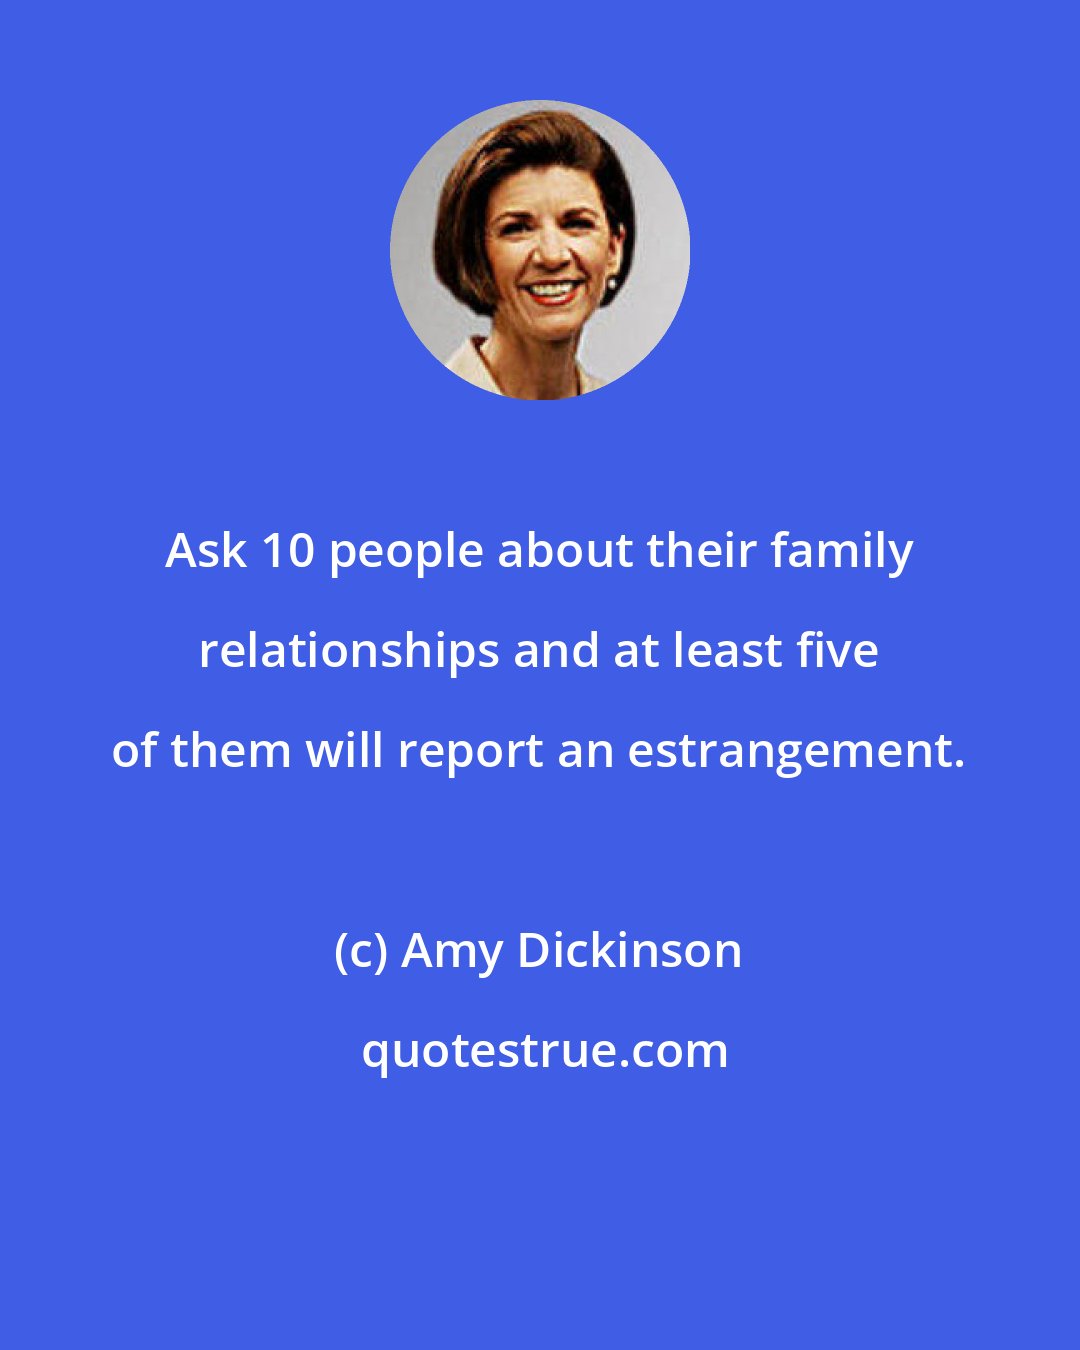 Amy Dickinson: Ask 10 people about their family relationships and at least five of them will report an estrangement.